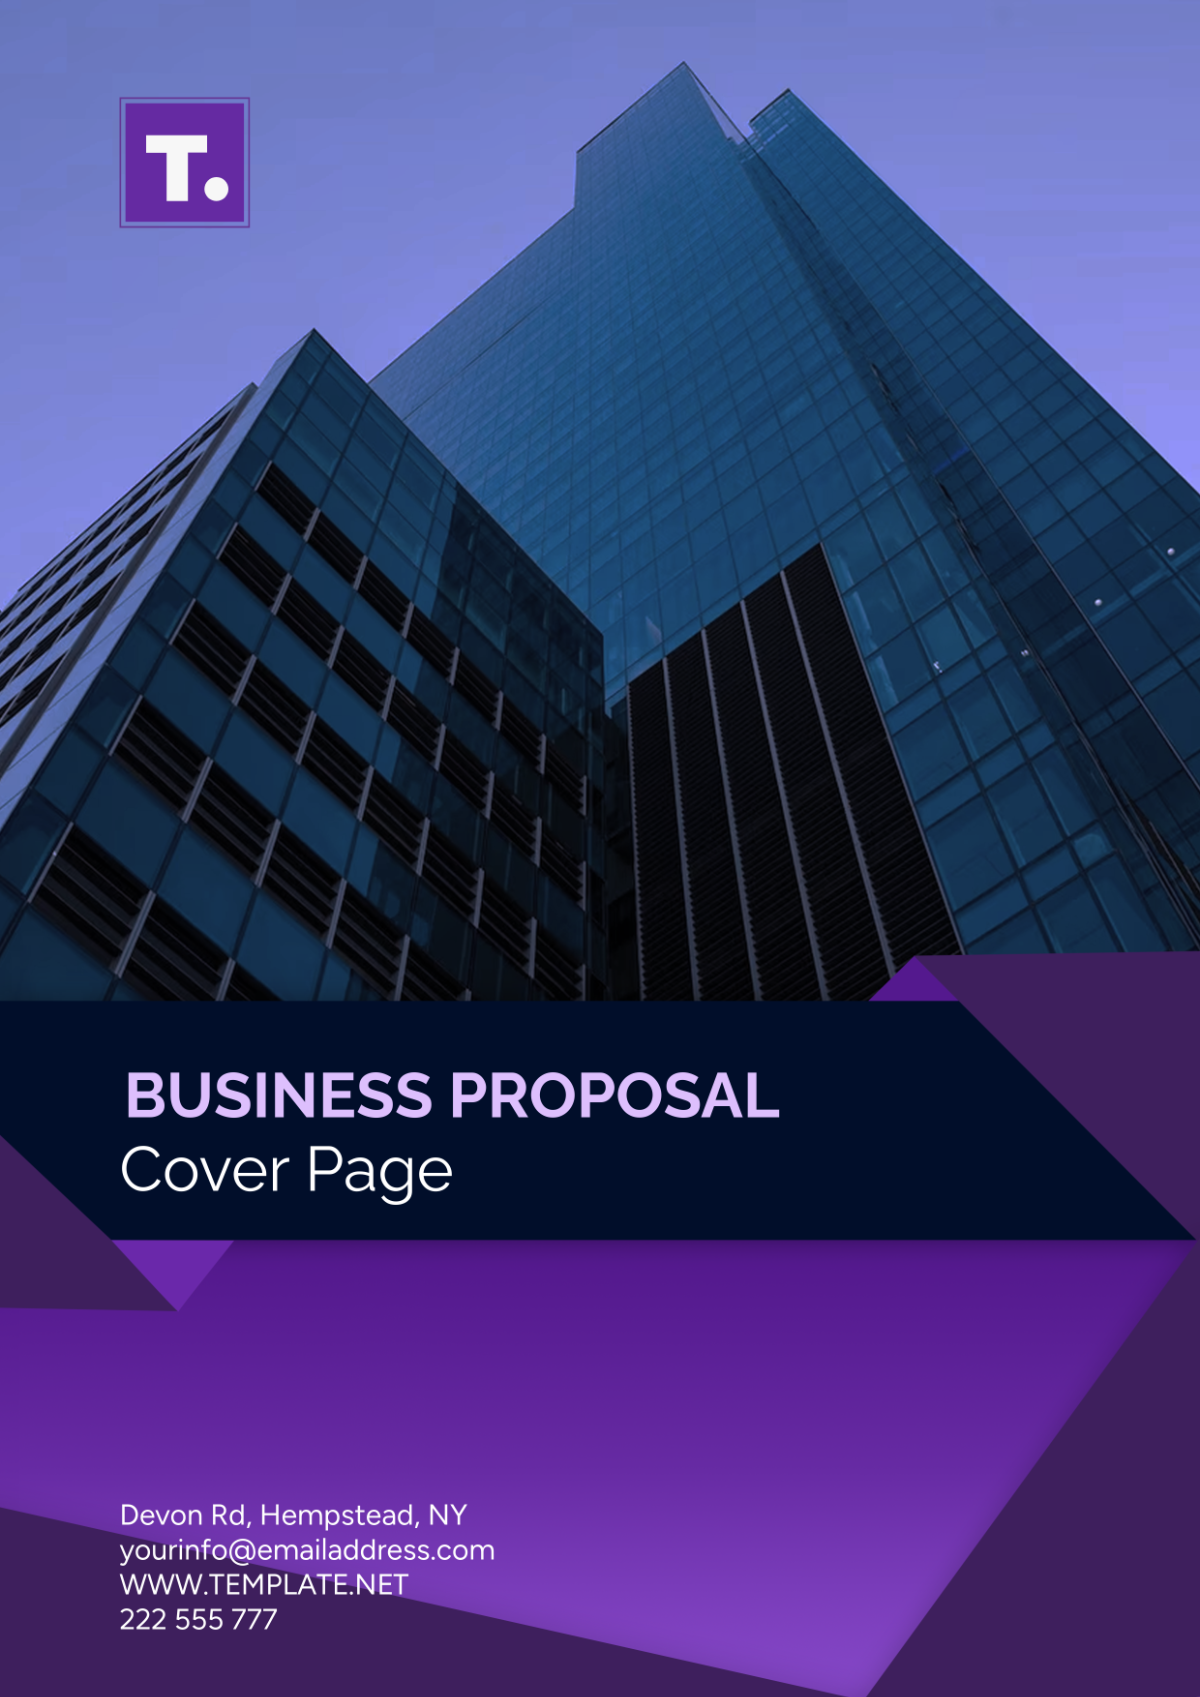 Business Proposal Cover Page